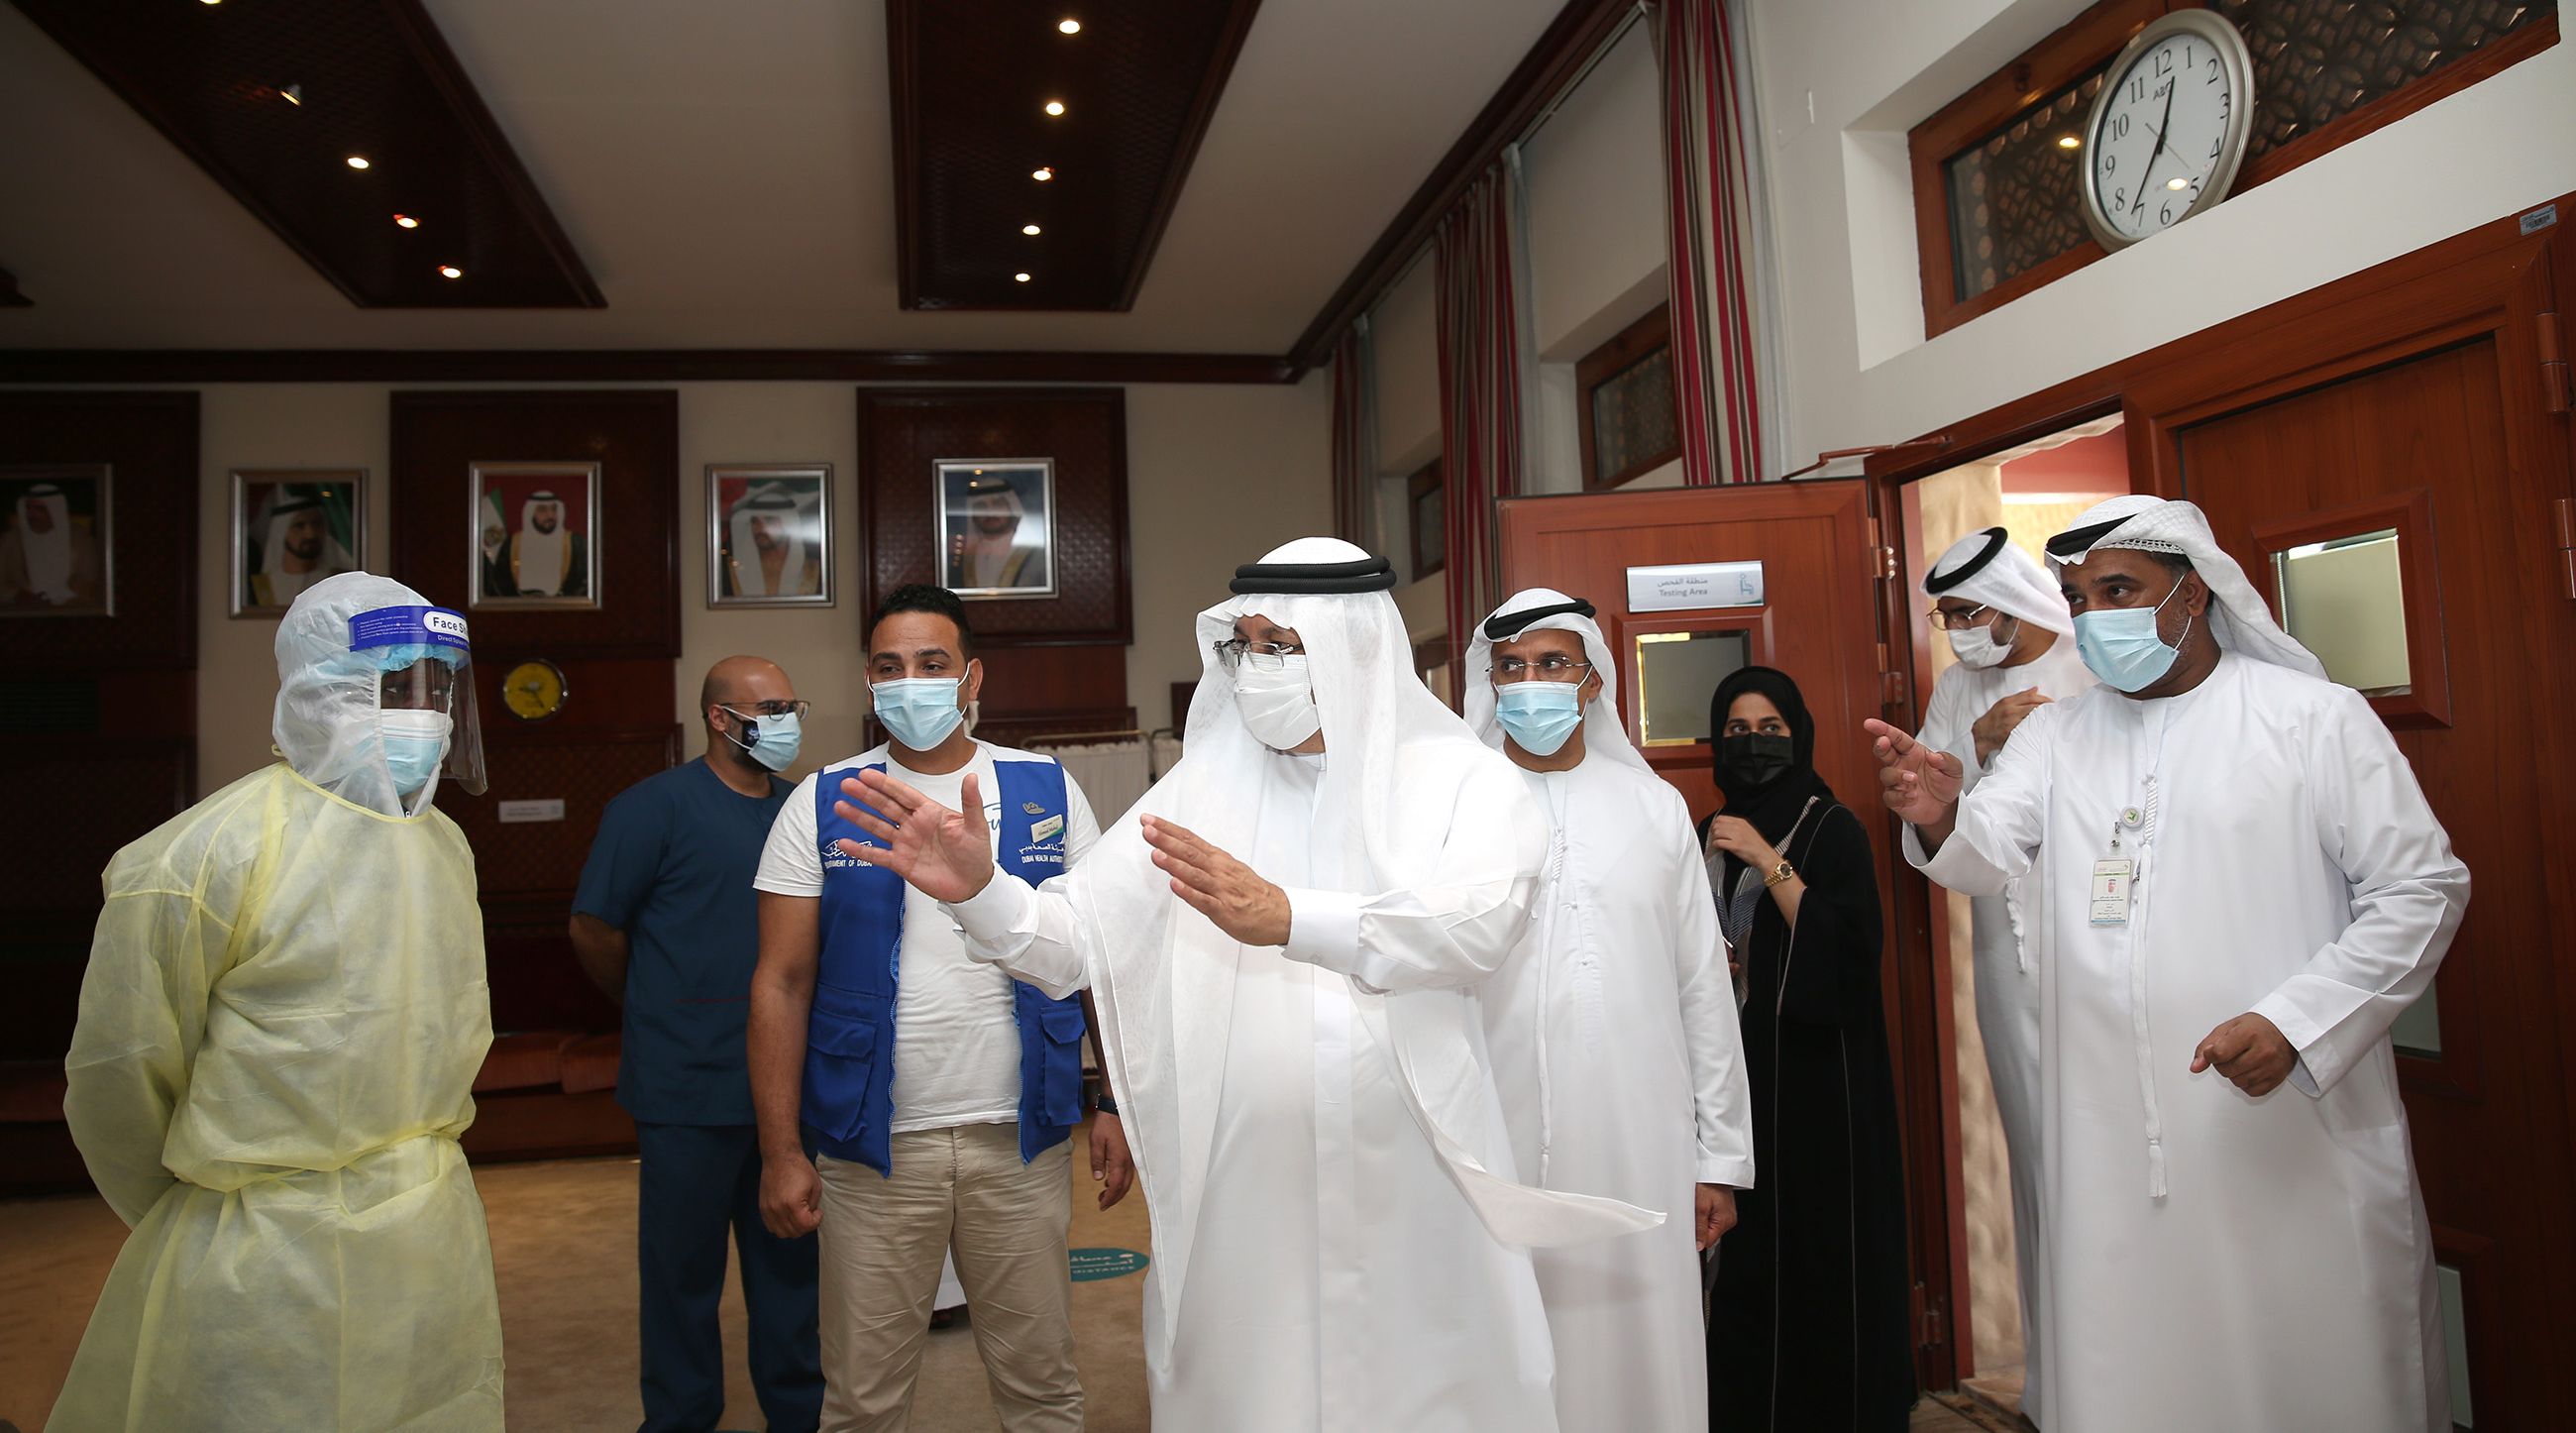 DHA Director-General inspects new COVID-19 testing centre in Jumeirah 1 Port Majlis